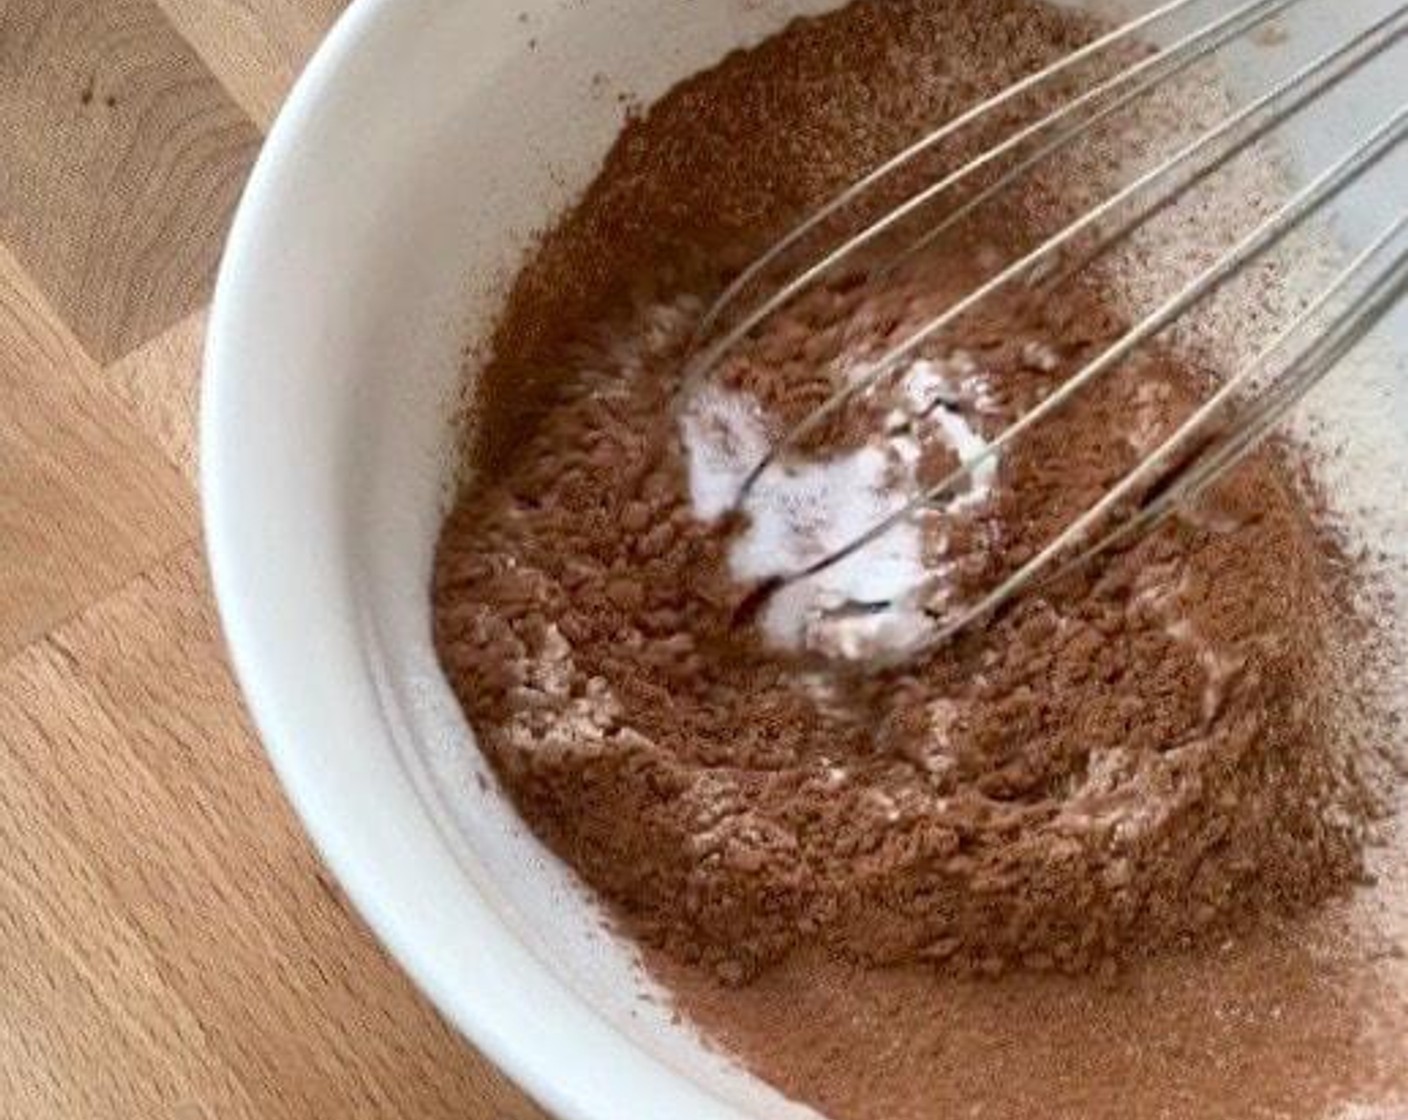 step 3 Then, sift together the All-Purpose Flour (1 cup) and Unsweetened Cocoa Powder (1 Tbsp). Add in Baking Powder (1/4 tsp) and Salt (1/4 tsp). Mix well and set aside.